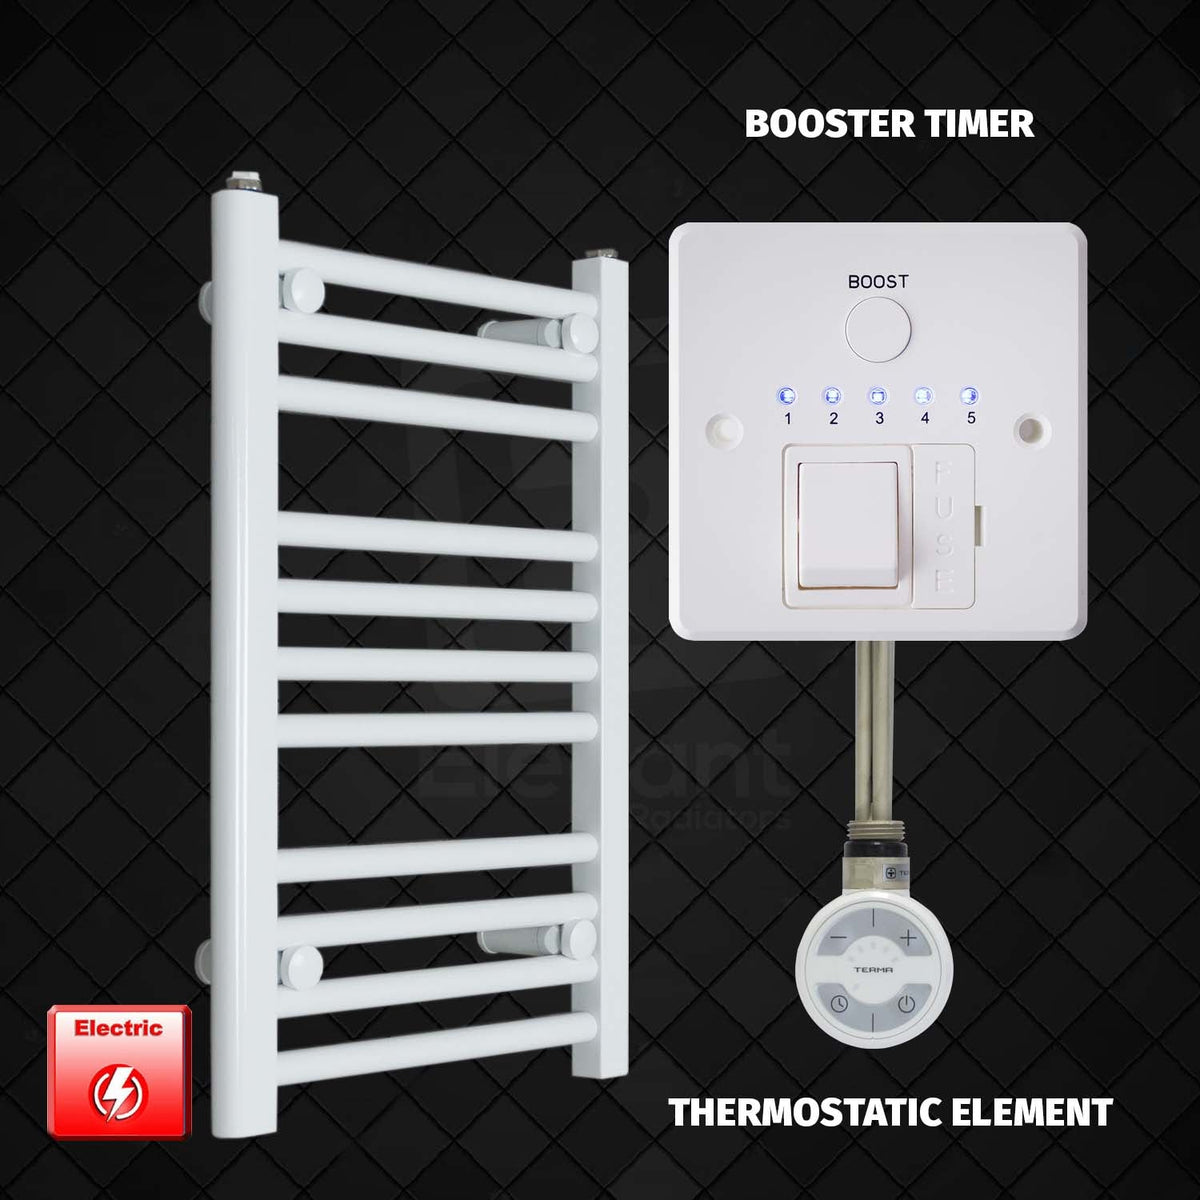 600 mm High 500 mm Wide Pre-Filled Electric Heated Towel Rail Radiator White HTR MOA Thermostatic element Booster timer